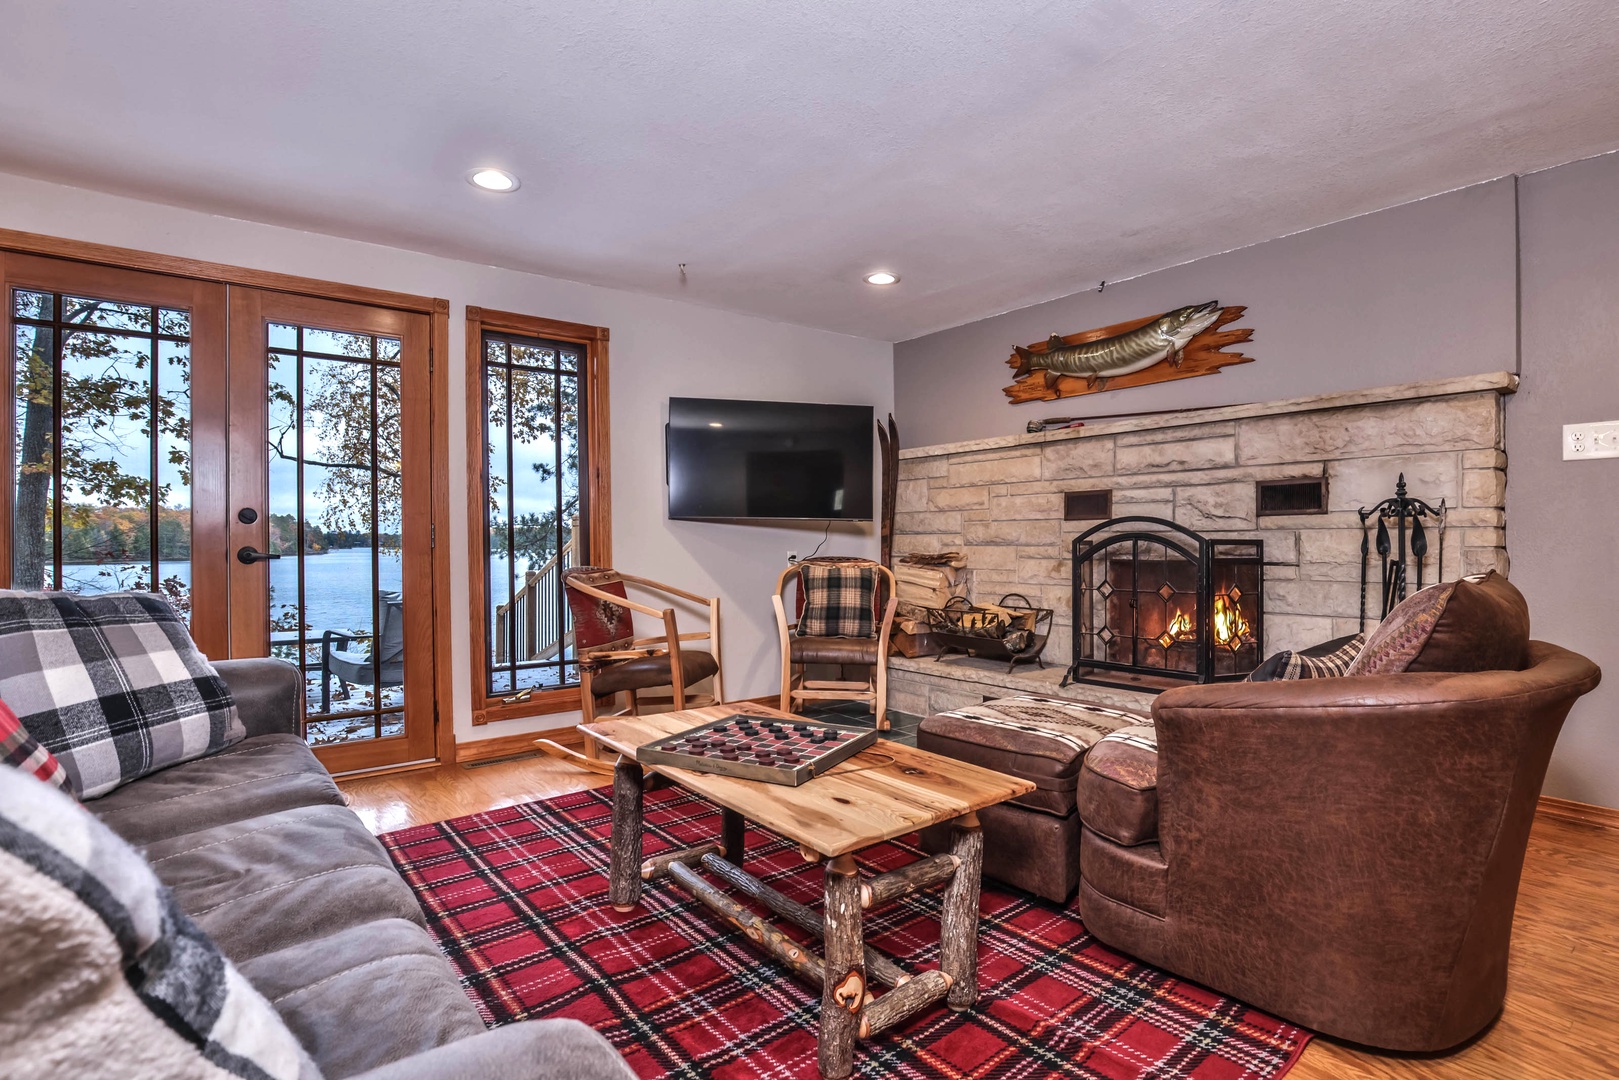 Sunrise Pines - Hiller Vacation Homes